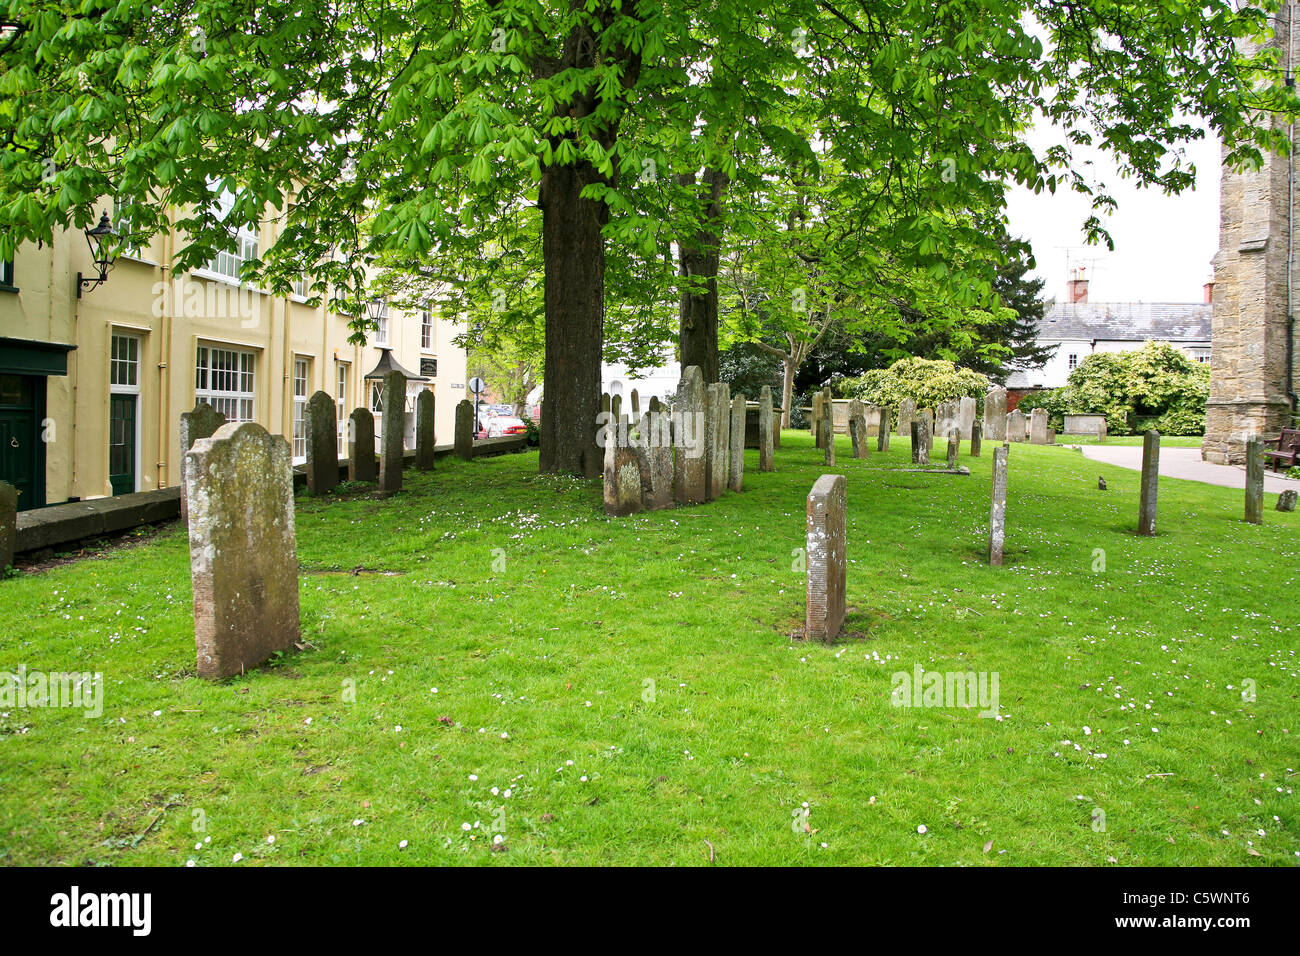 Gravestones in a leafy churchyard in Sidmouth, Devon, England, UK Stock Photo